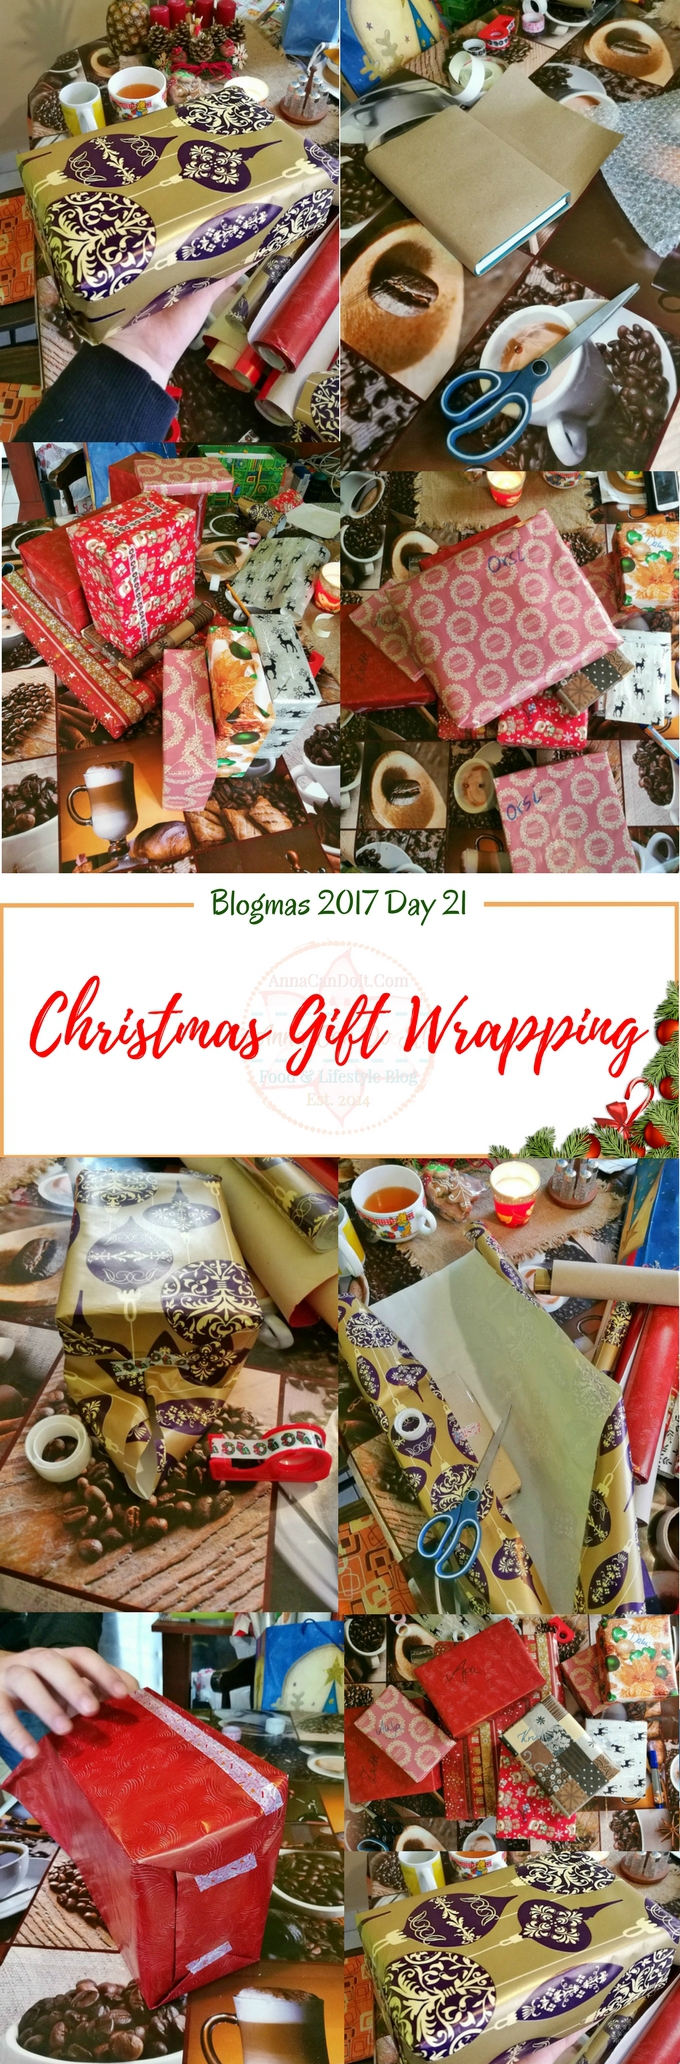 Christmas Gift Wrapping - Blogmas 2017 Day 21 - Anna Can Do It!